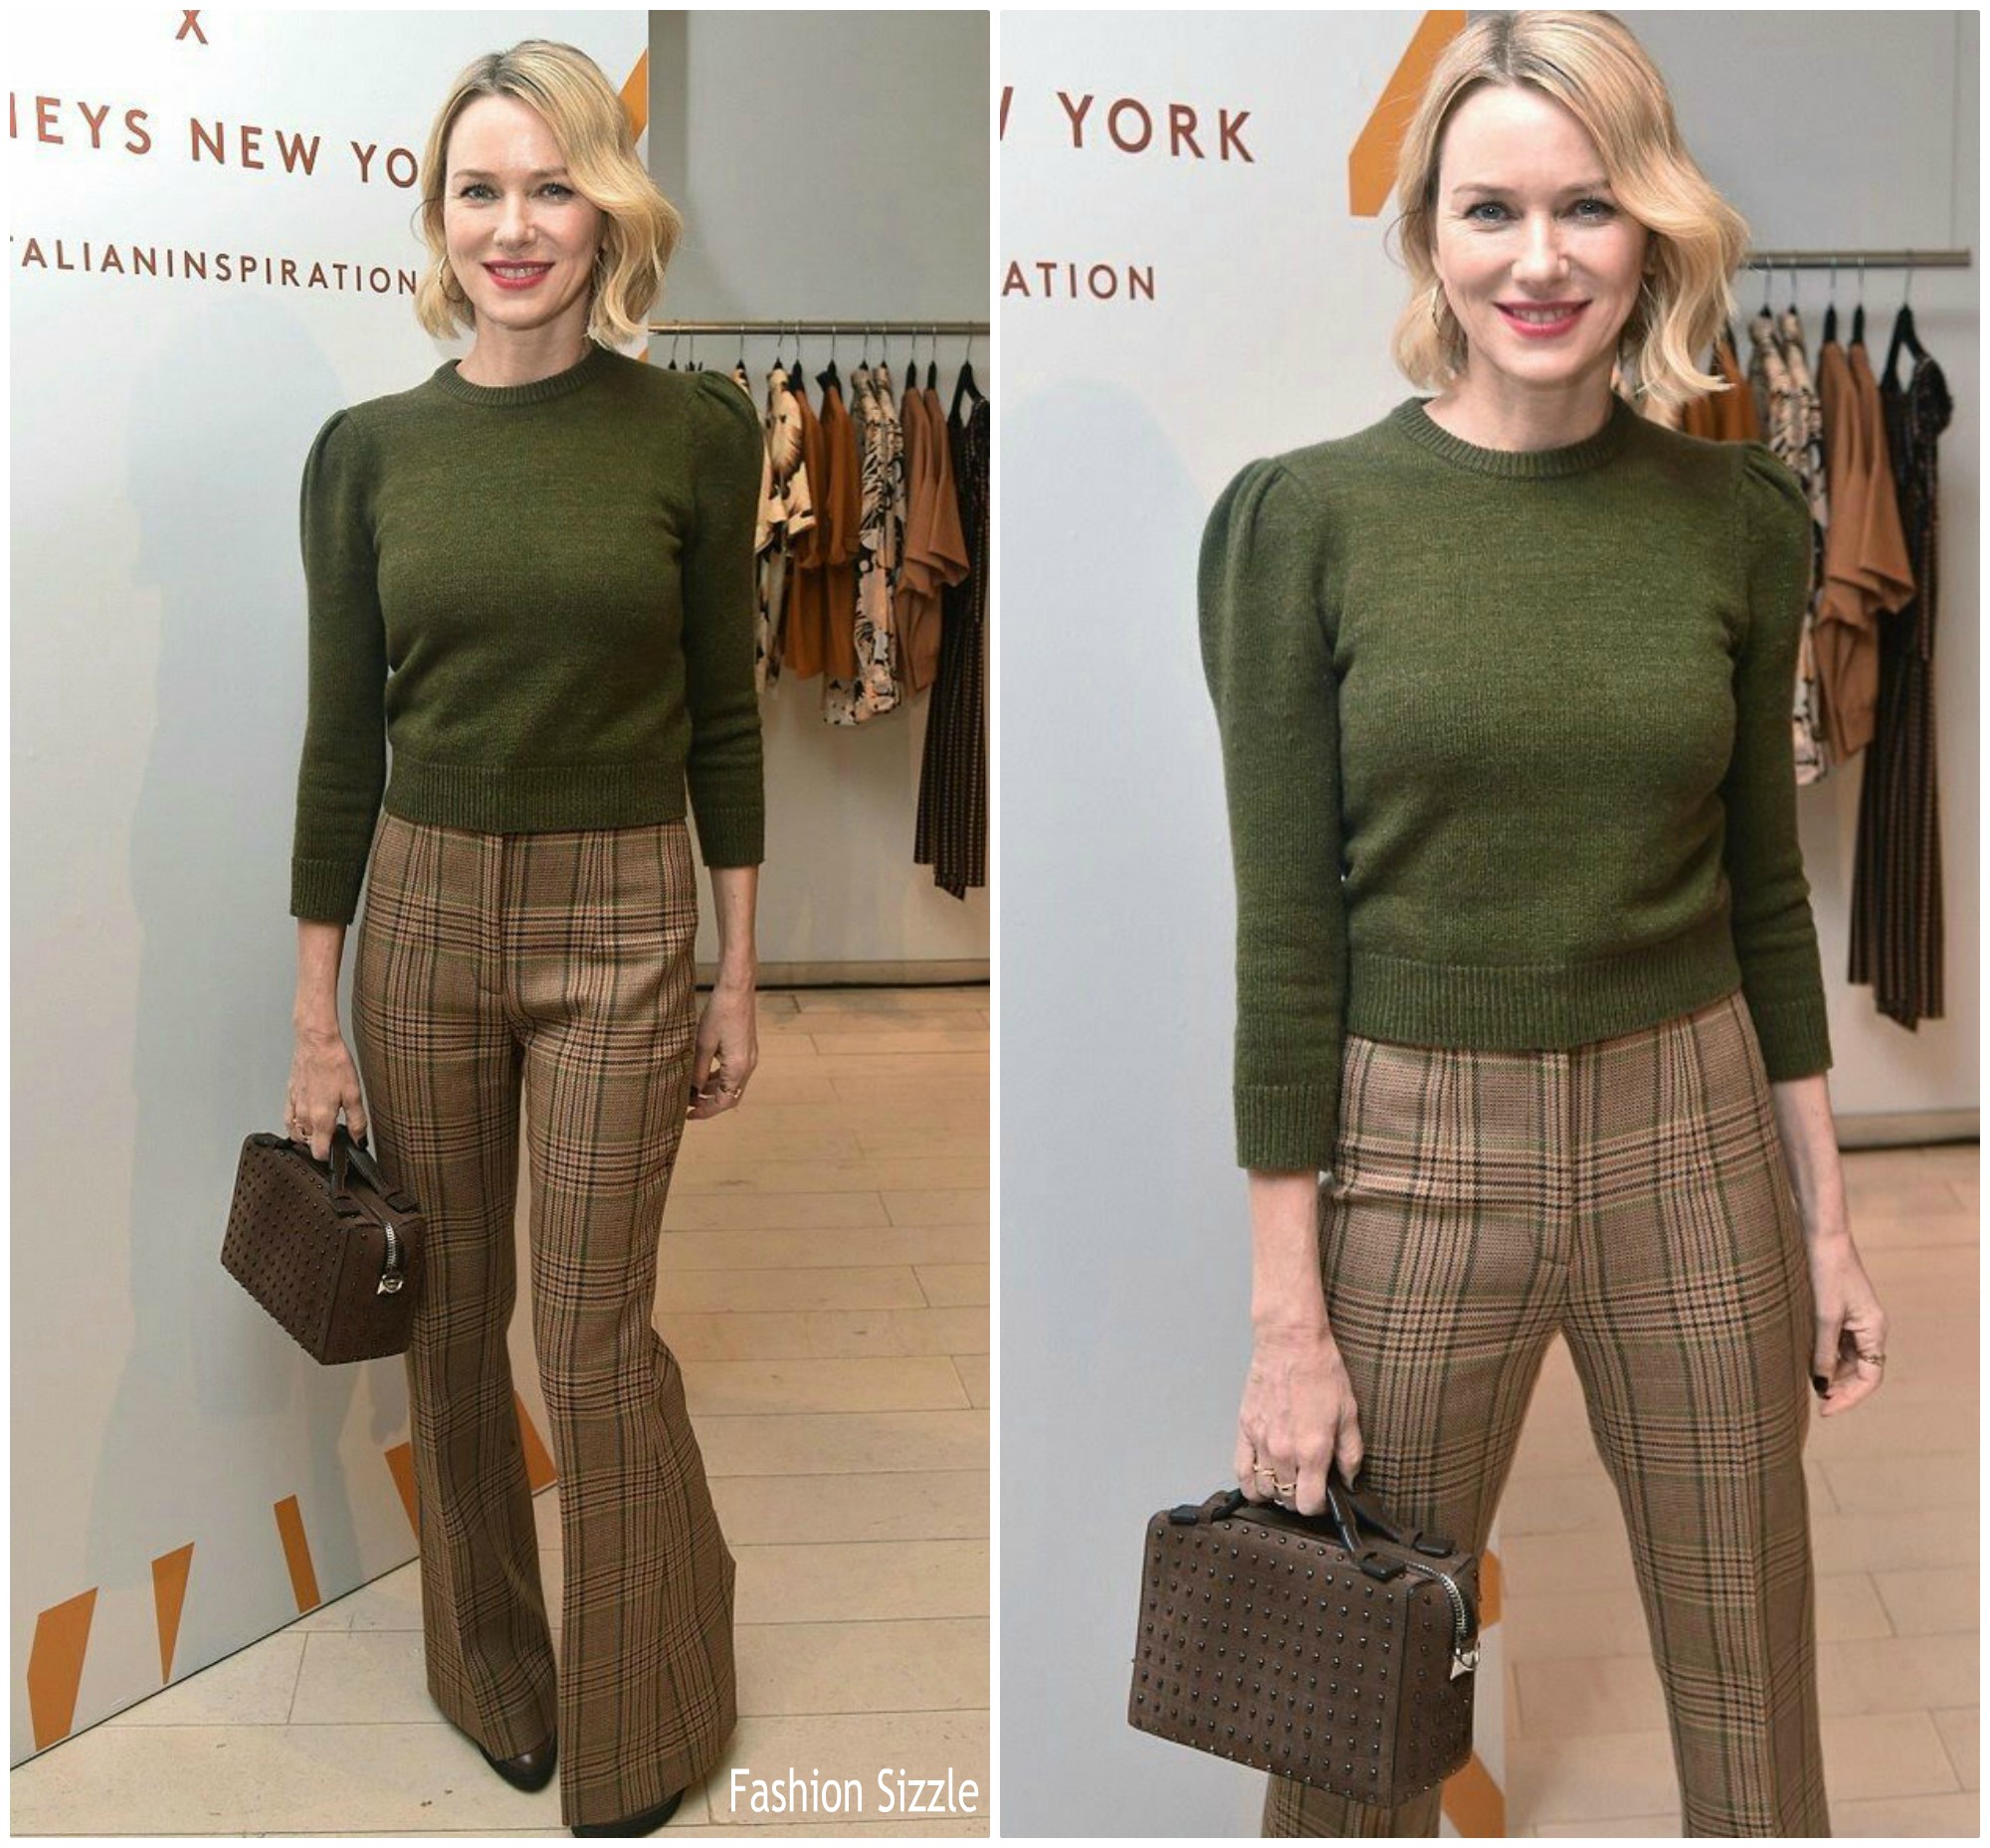 naomi-watts-in-michael-kors-collection-tods-x-barneys-new-york-capsule-collection-in-new-york